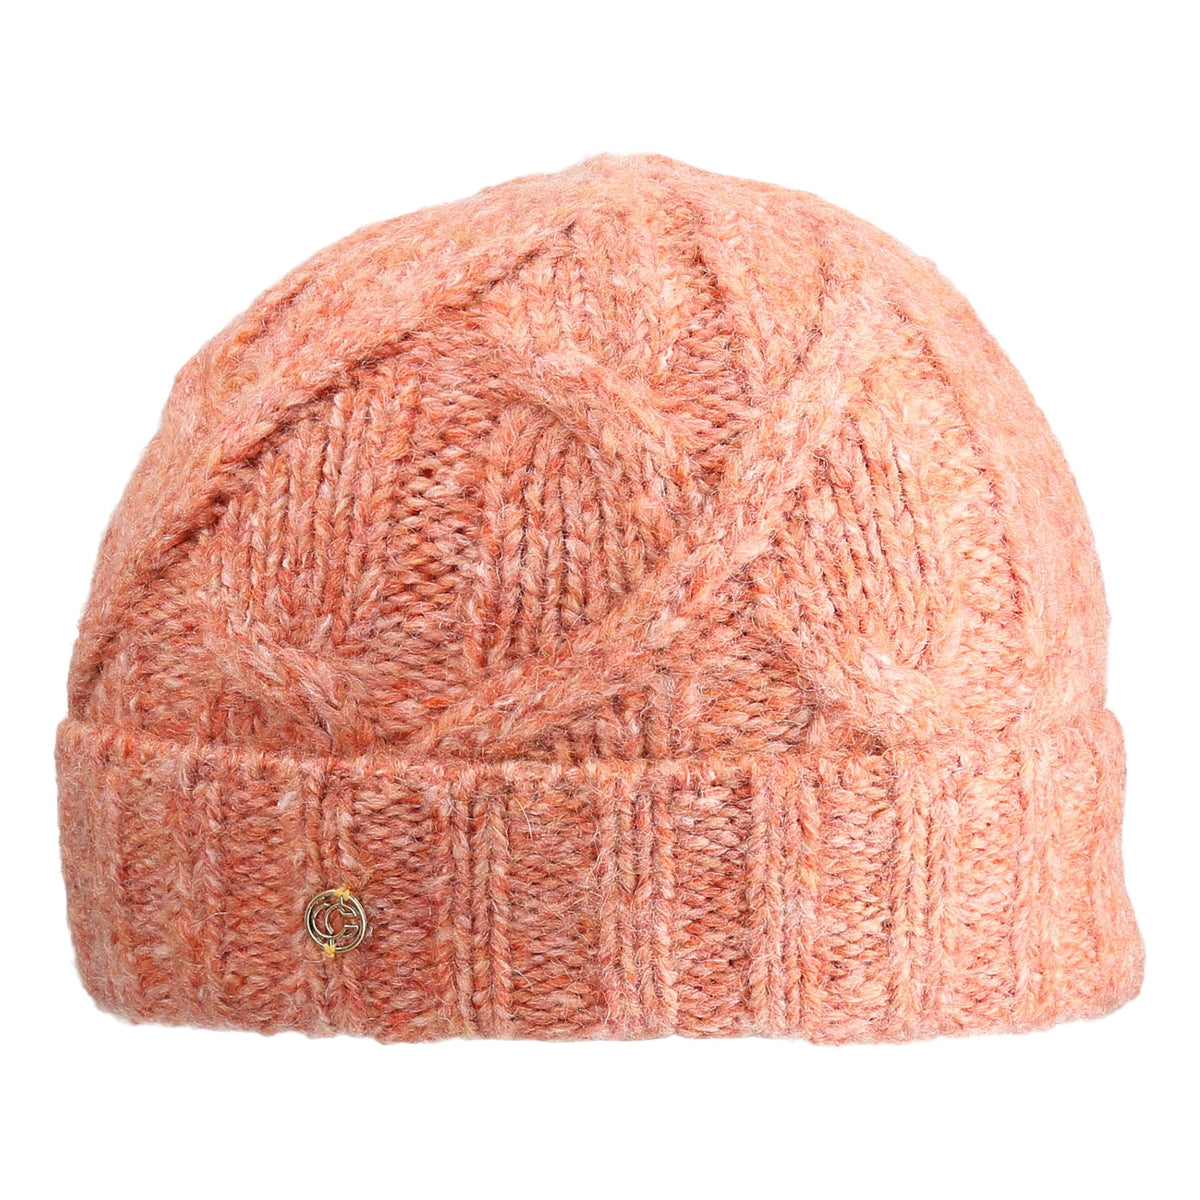 Tuque Janet Tall Femme